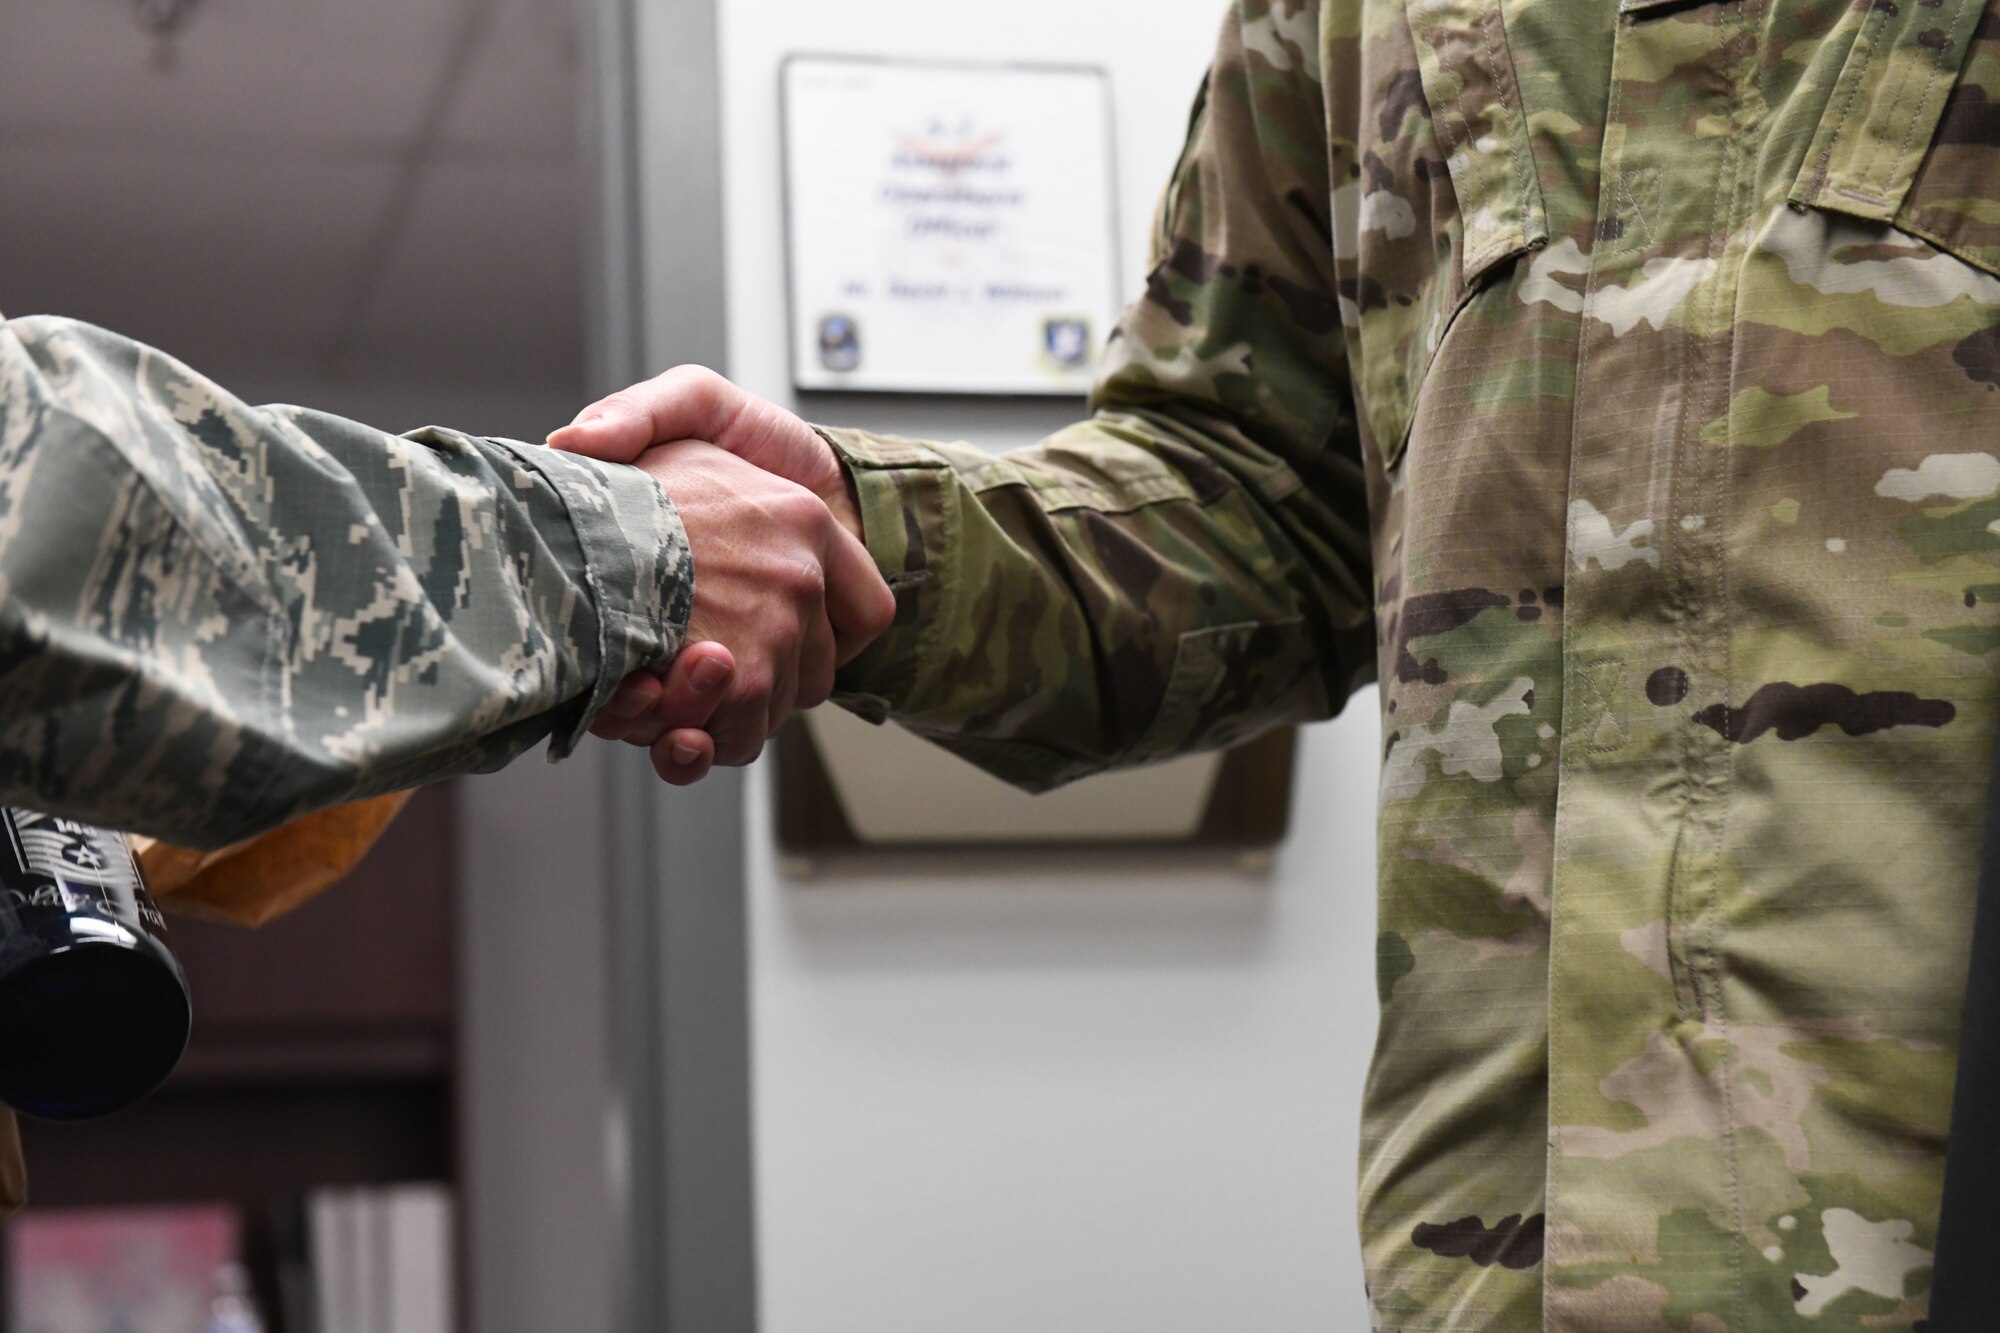 Senior Master Sgt. Jesse Frank, the 28th Security Forces Squadron operations superintendent, shakes hands with Chief Master Sgt. Justin Walker, the 28th Bomb Wing interim command chief at Ellsworth Air Force Base, S.D., Dec. 4, 2018. Frank was informed that he’d been selected for the highest enlisted rank: chief master sergeant. (U.S. Air Force photo by Airman 1st Class Thomas Karol)